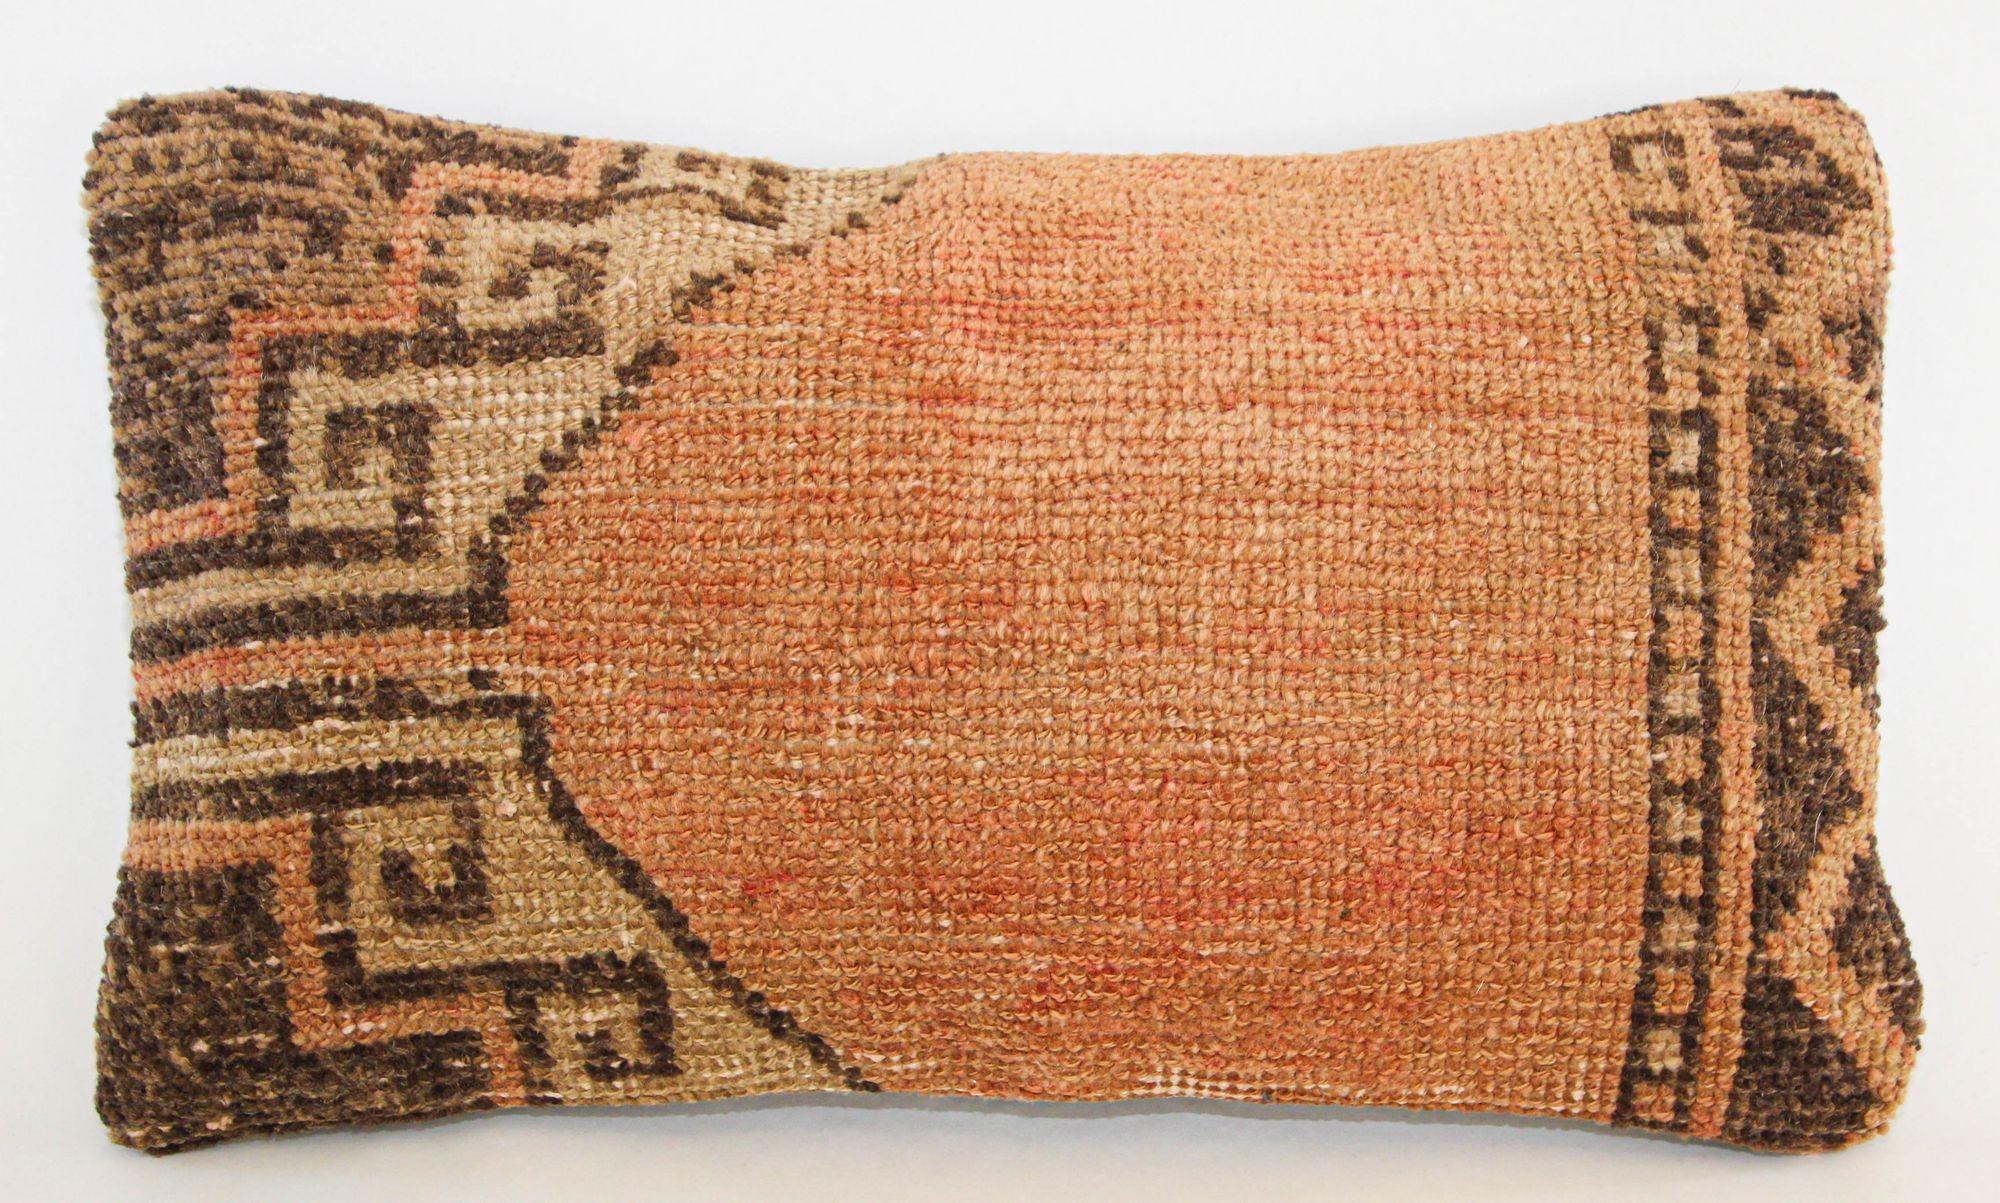 Antique Tabriz Persian rug pillow.
This lumbar pillow was made from an early 20th-century Persian Tabriz rug.
This lovely antique decorative pillow features an antique fragment fabric rug on front which is characterized by geometric abstracts